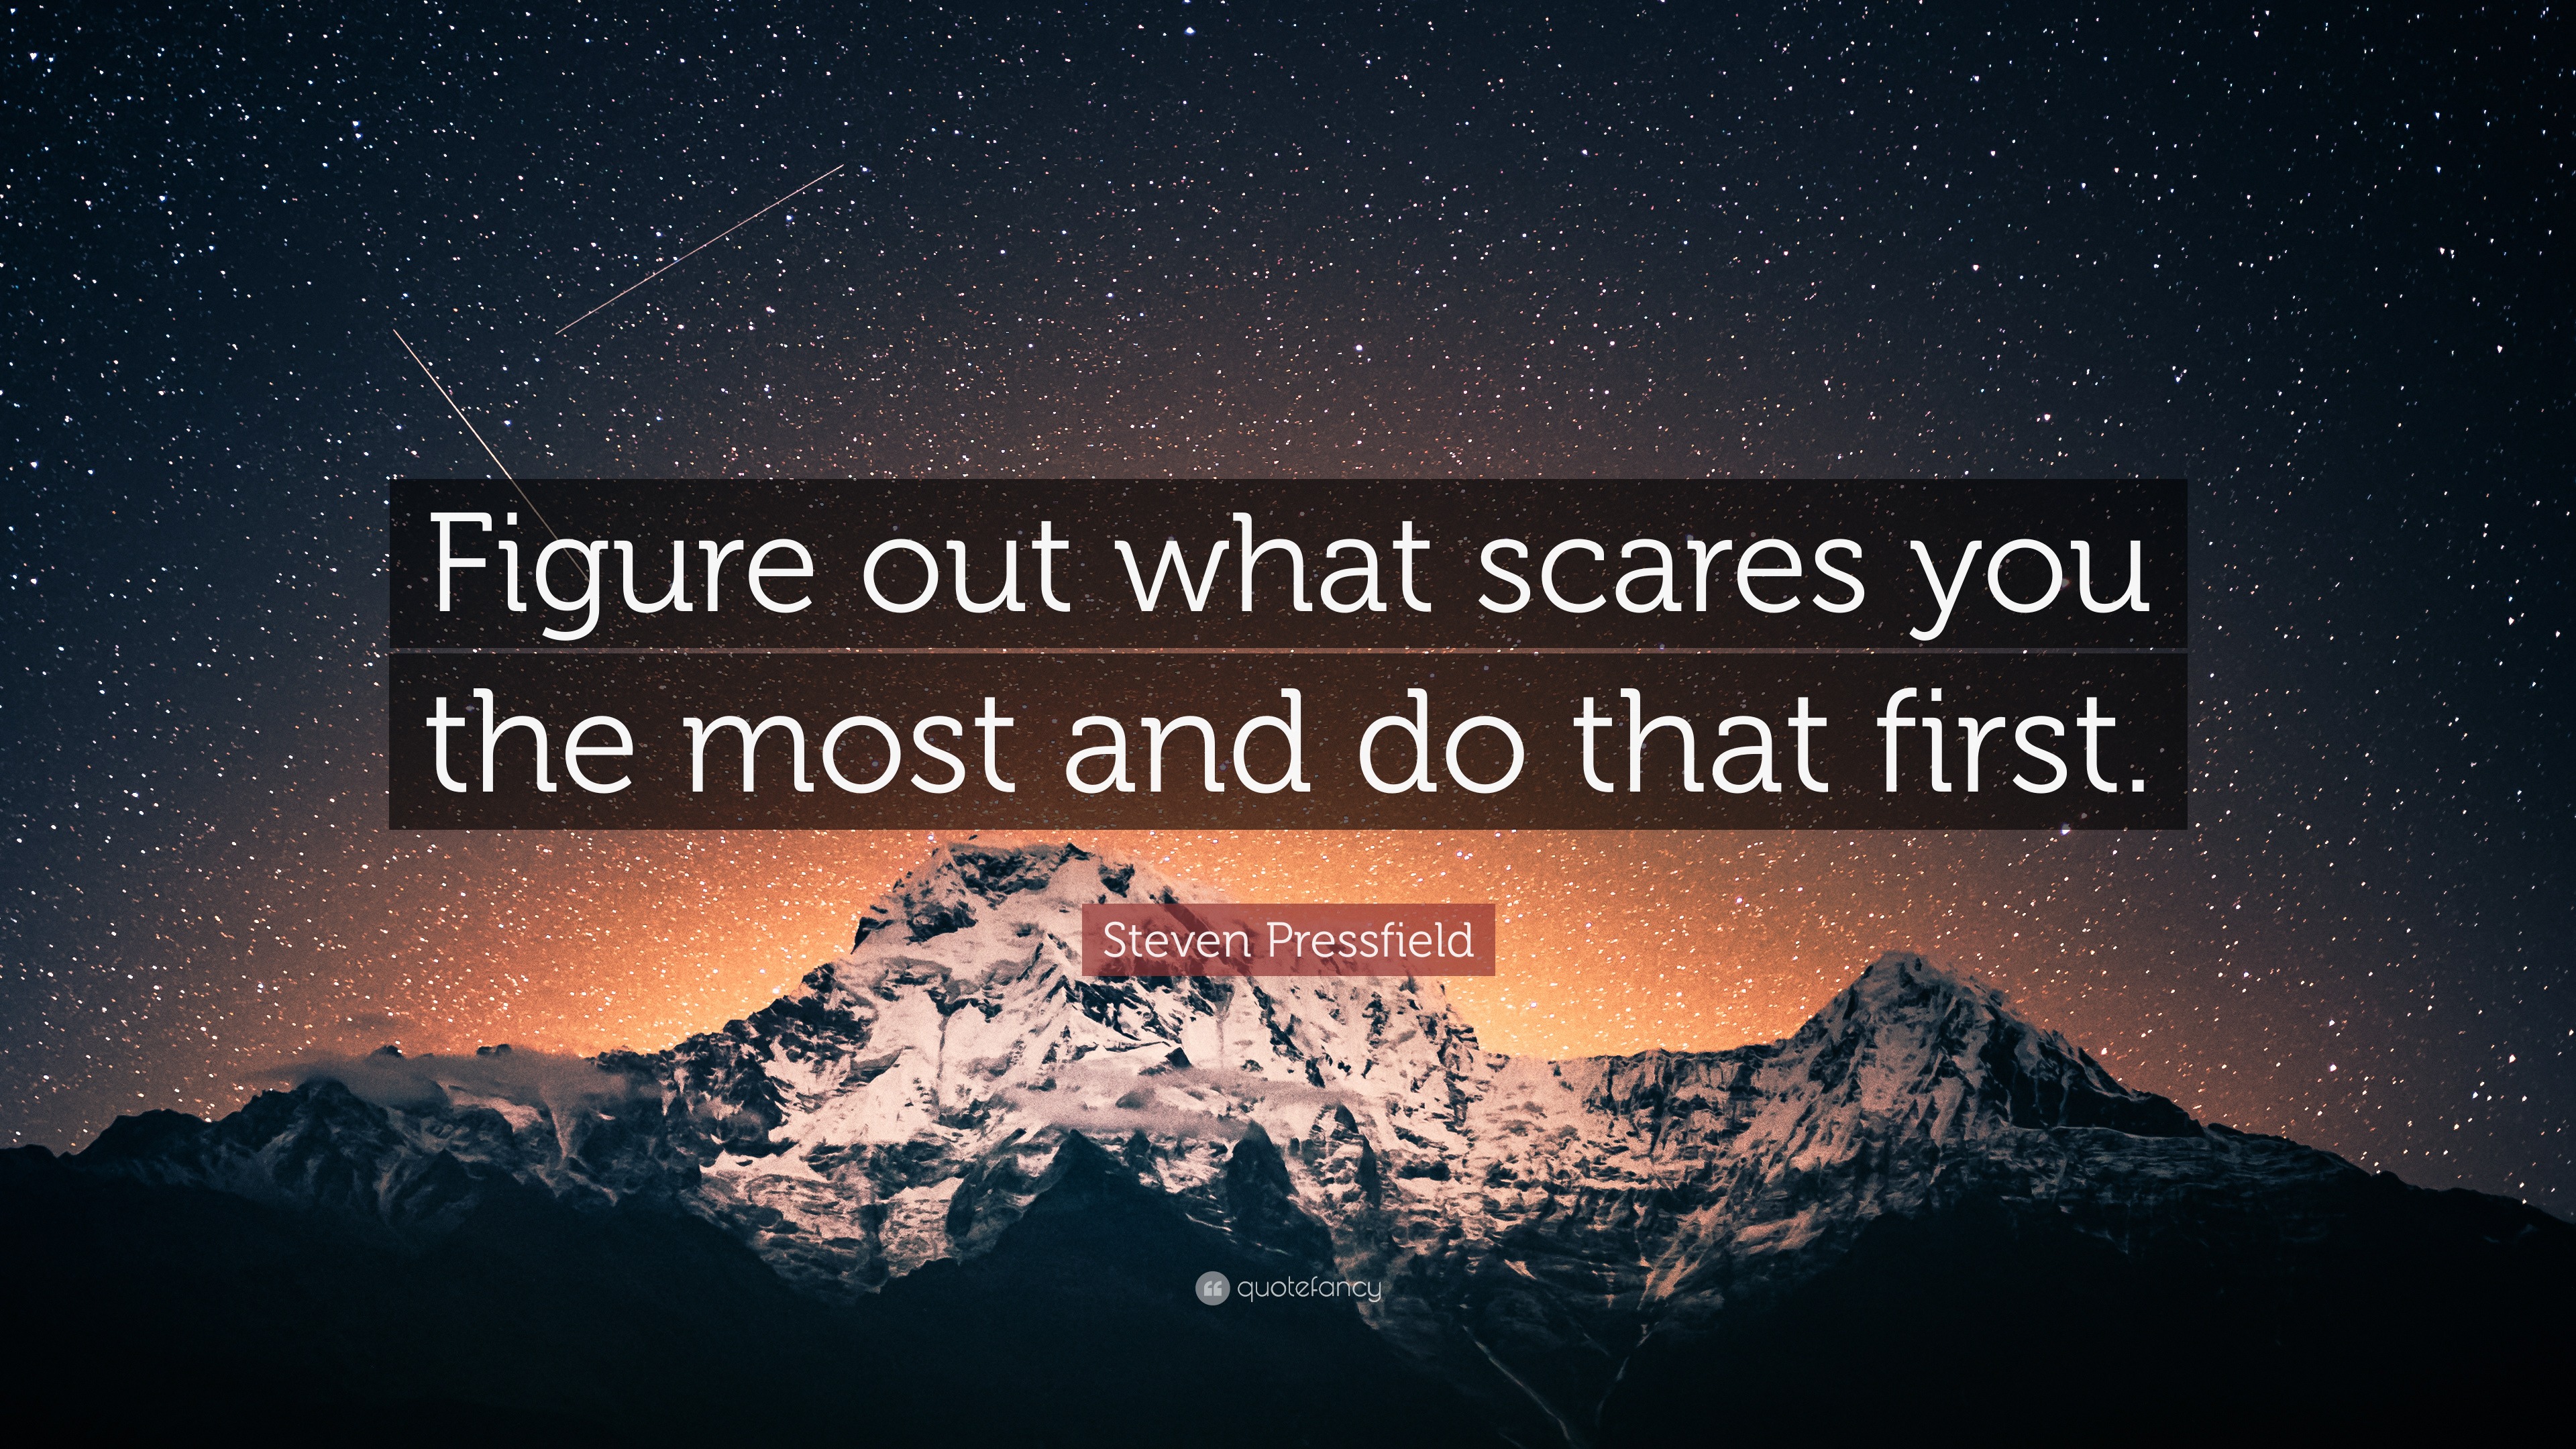 essay on what scares you the most